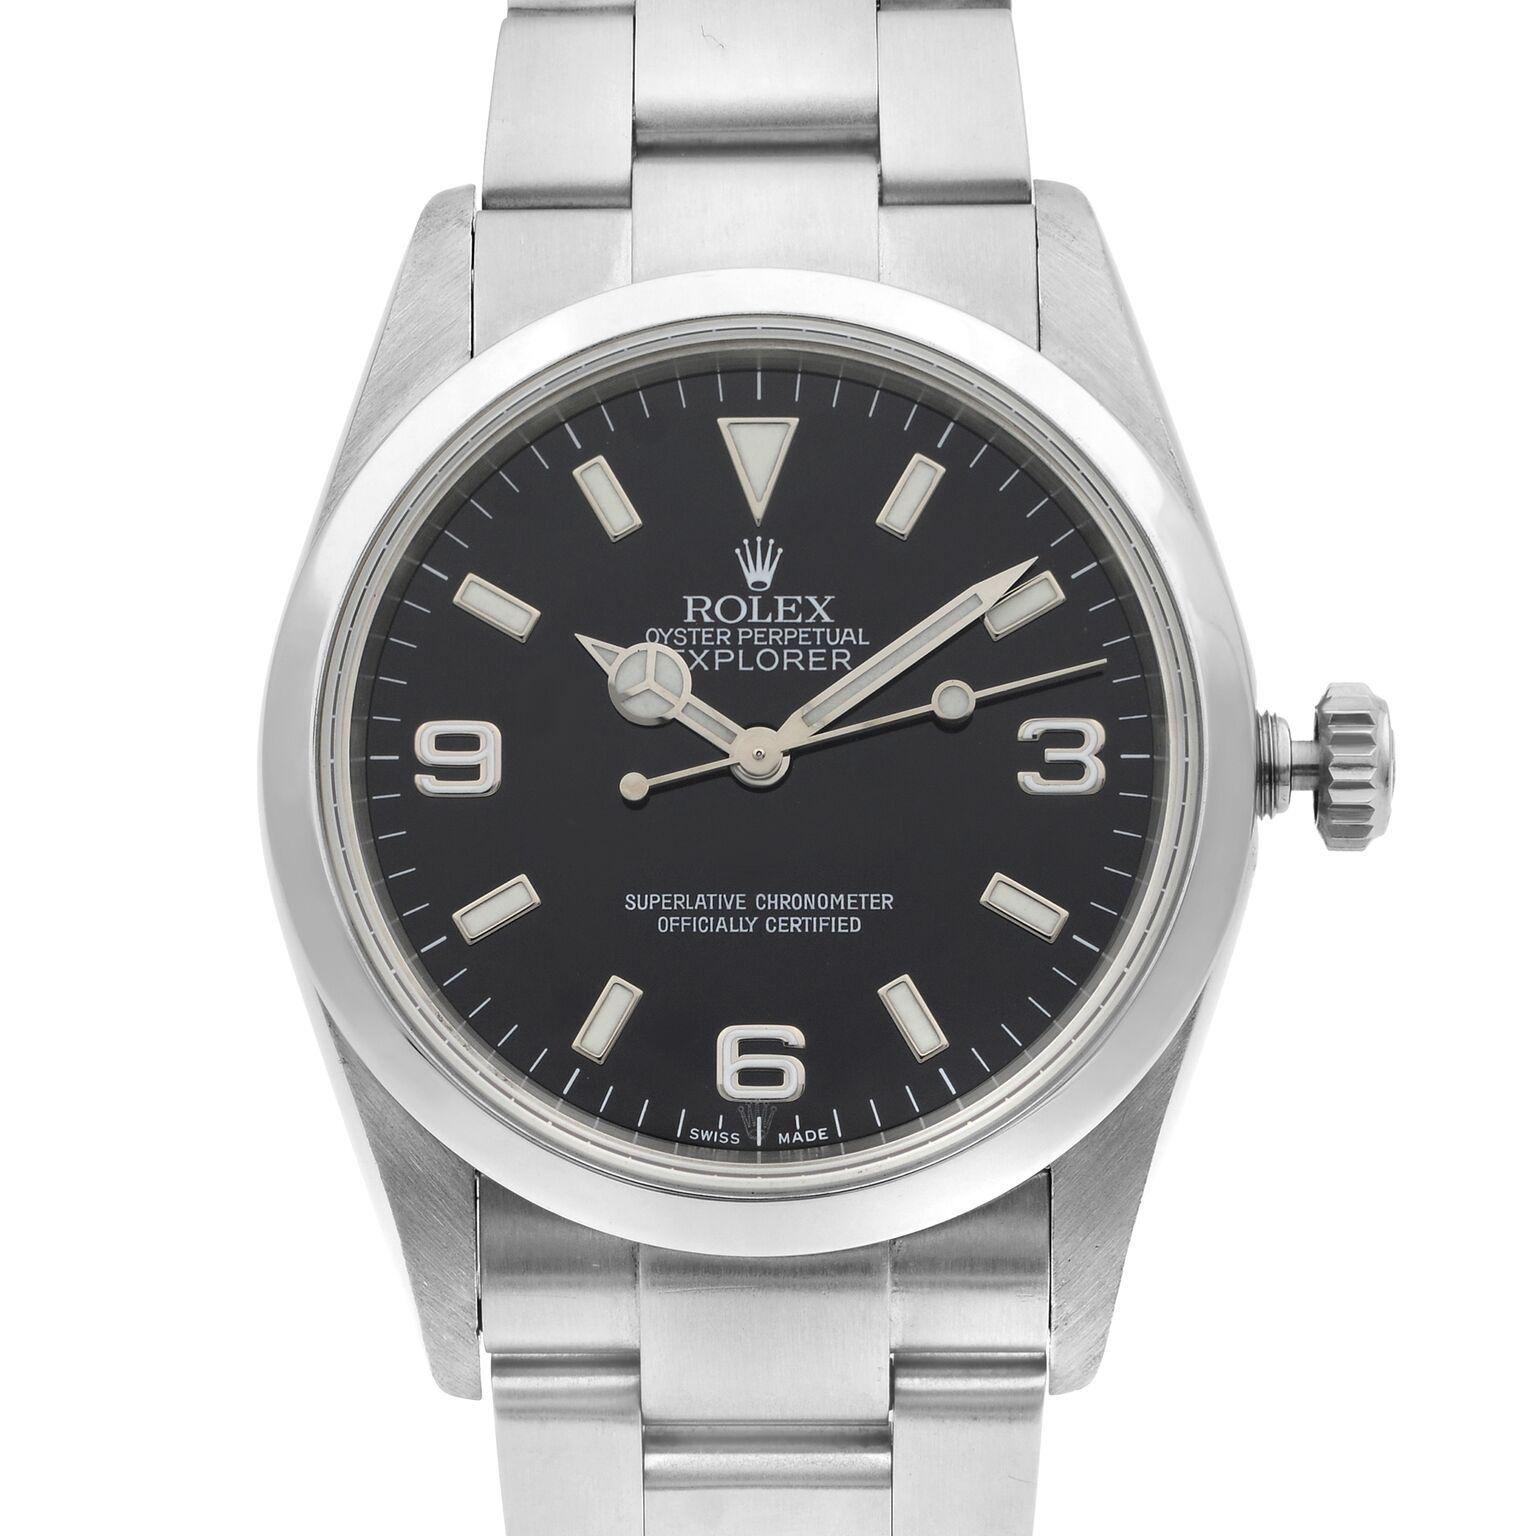 This pre-owned Rolex Explorer 114270 is a beautiful men's timepiece that is powered by a mechanical (automatic) movement which is cased in a stainless steel case. It has a round shape face, no features dial, and has hand sticks & numerals style